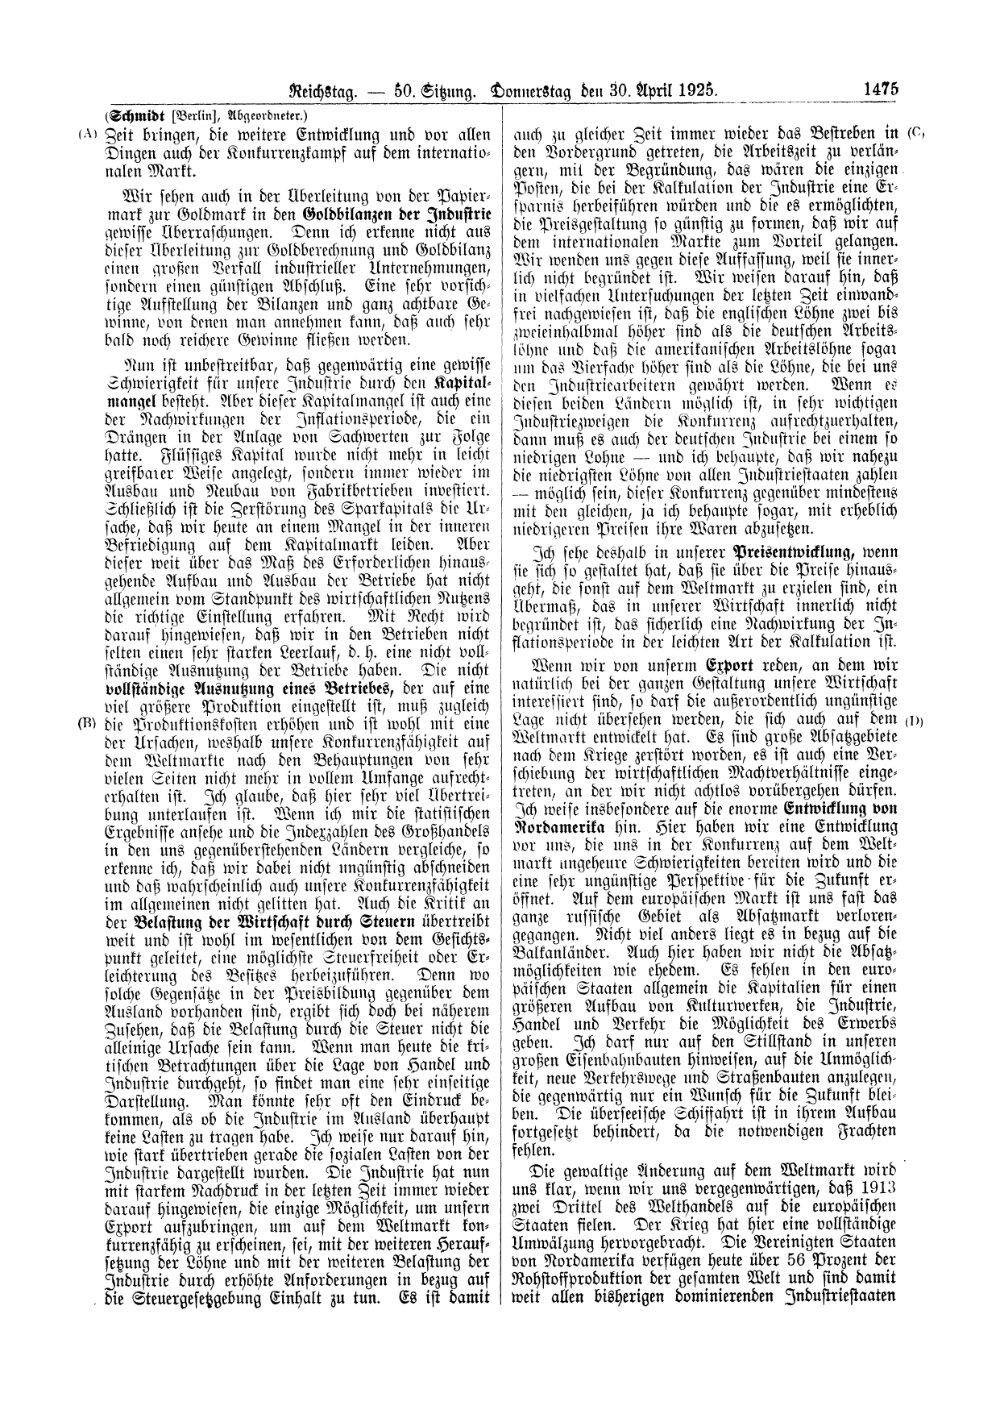 Scan of page 1475